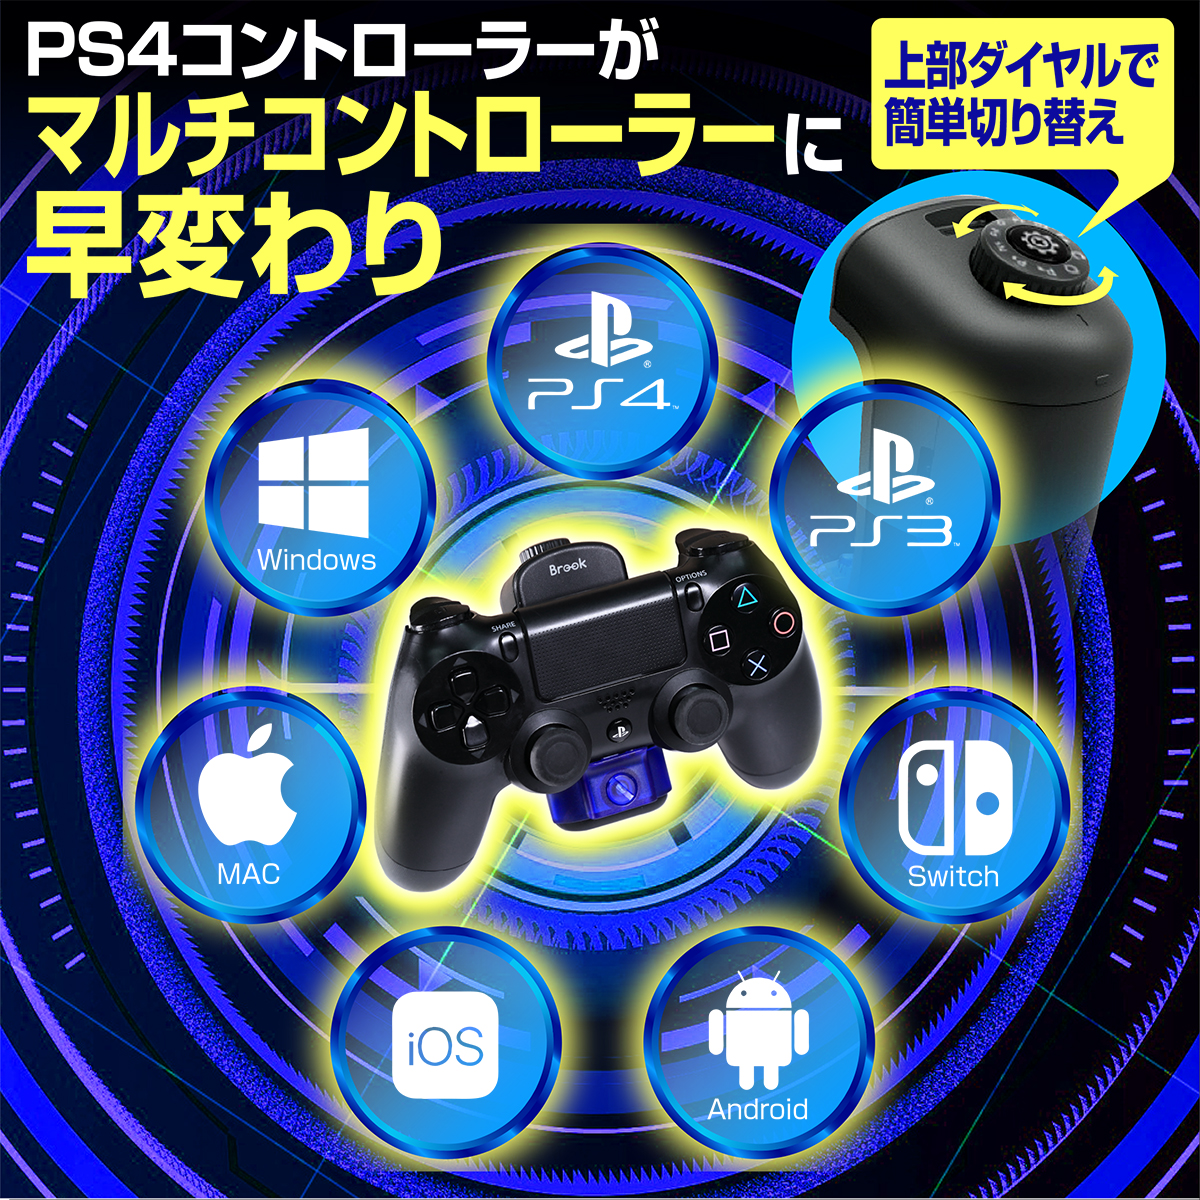 Ps4 制御機 後衛花王 専用 マルチアダプター 変字 Ps4 Ps3 Switch Android Pc Mac 本体フィット Cannes Encheres Com